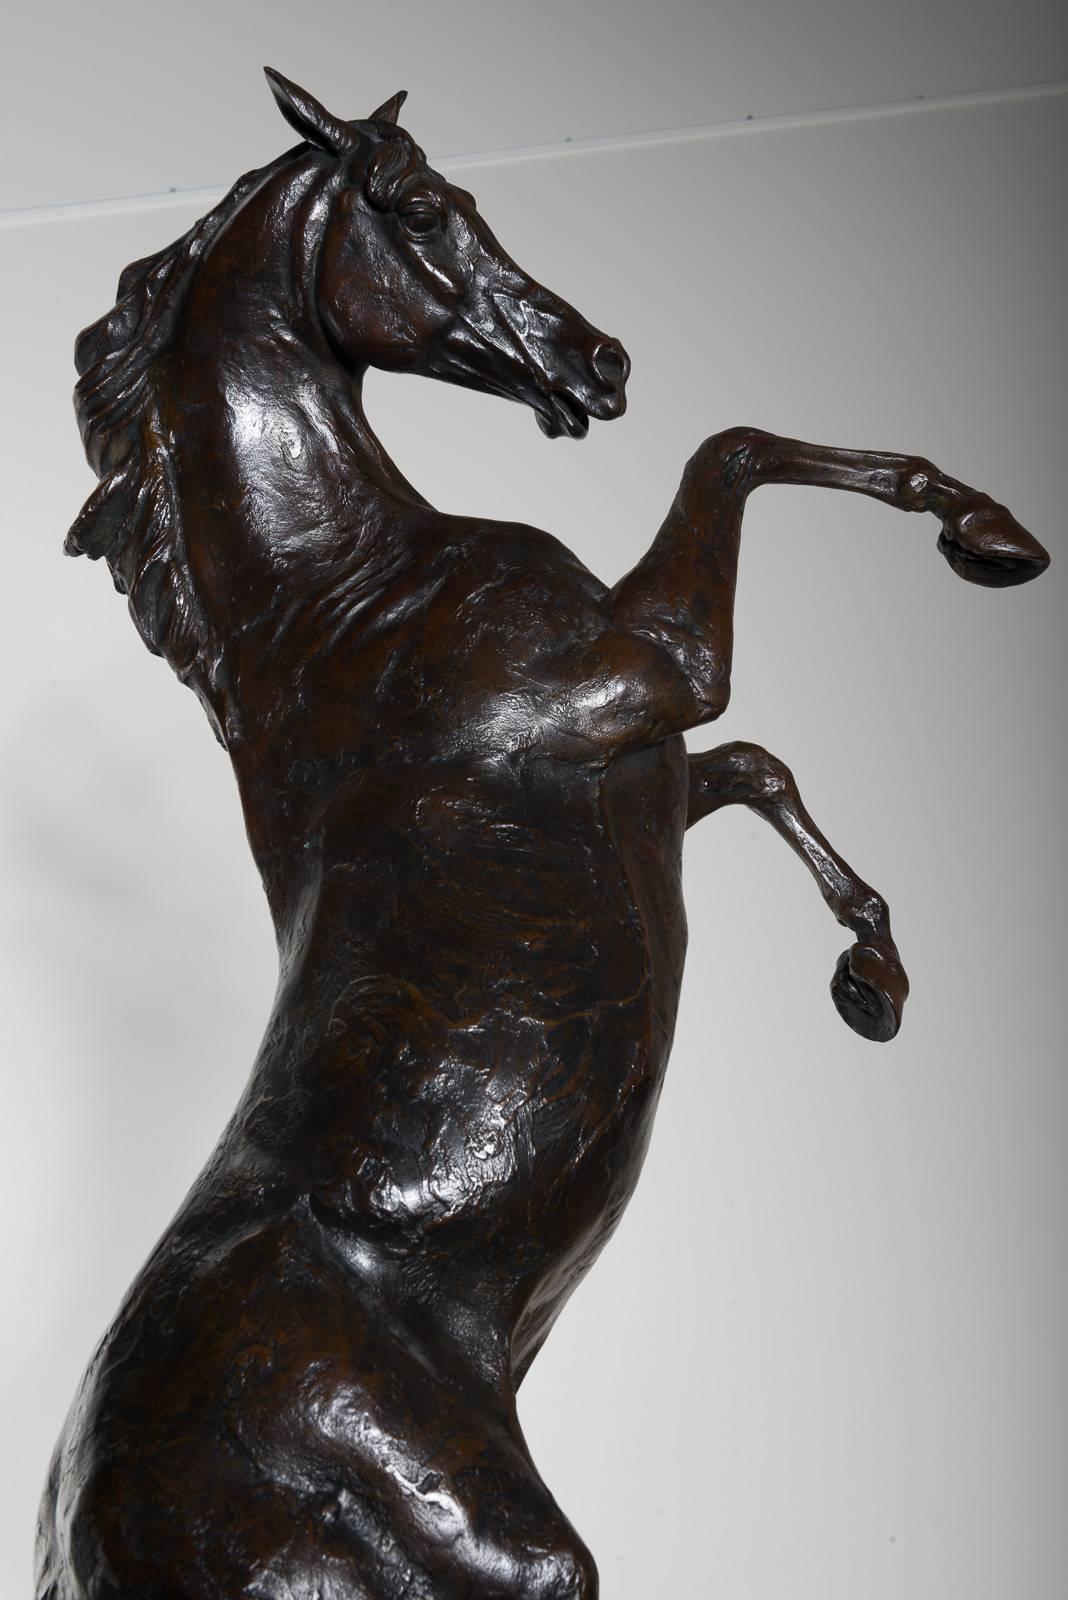 A bronze by Arnaud Kasper a famous French artist for the sculpture.
This piece is a sculpture in style a lights horse.
The artist produce a limited edition of 8 by model.
The model exposed is N°2 of 8, manufacture of the Foundry is French by